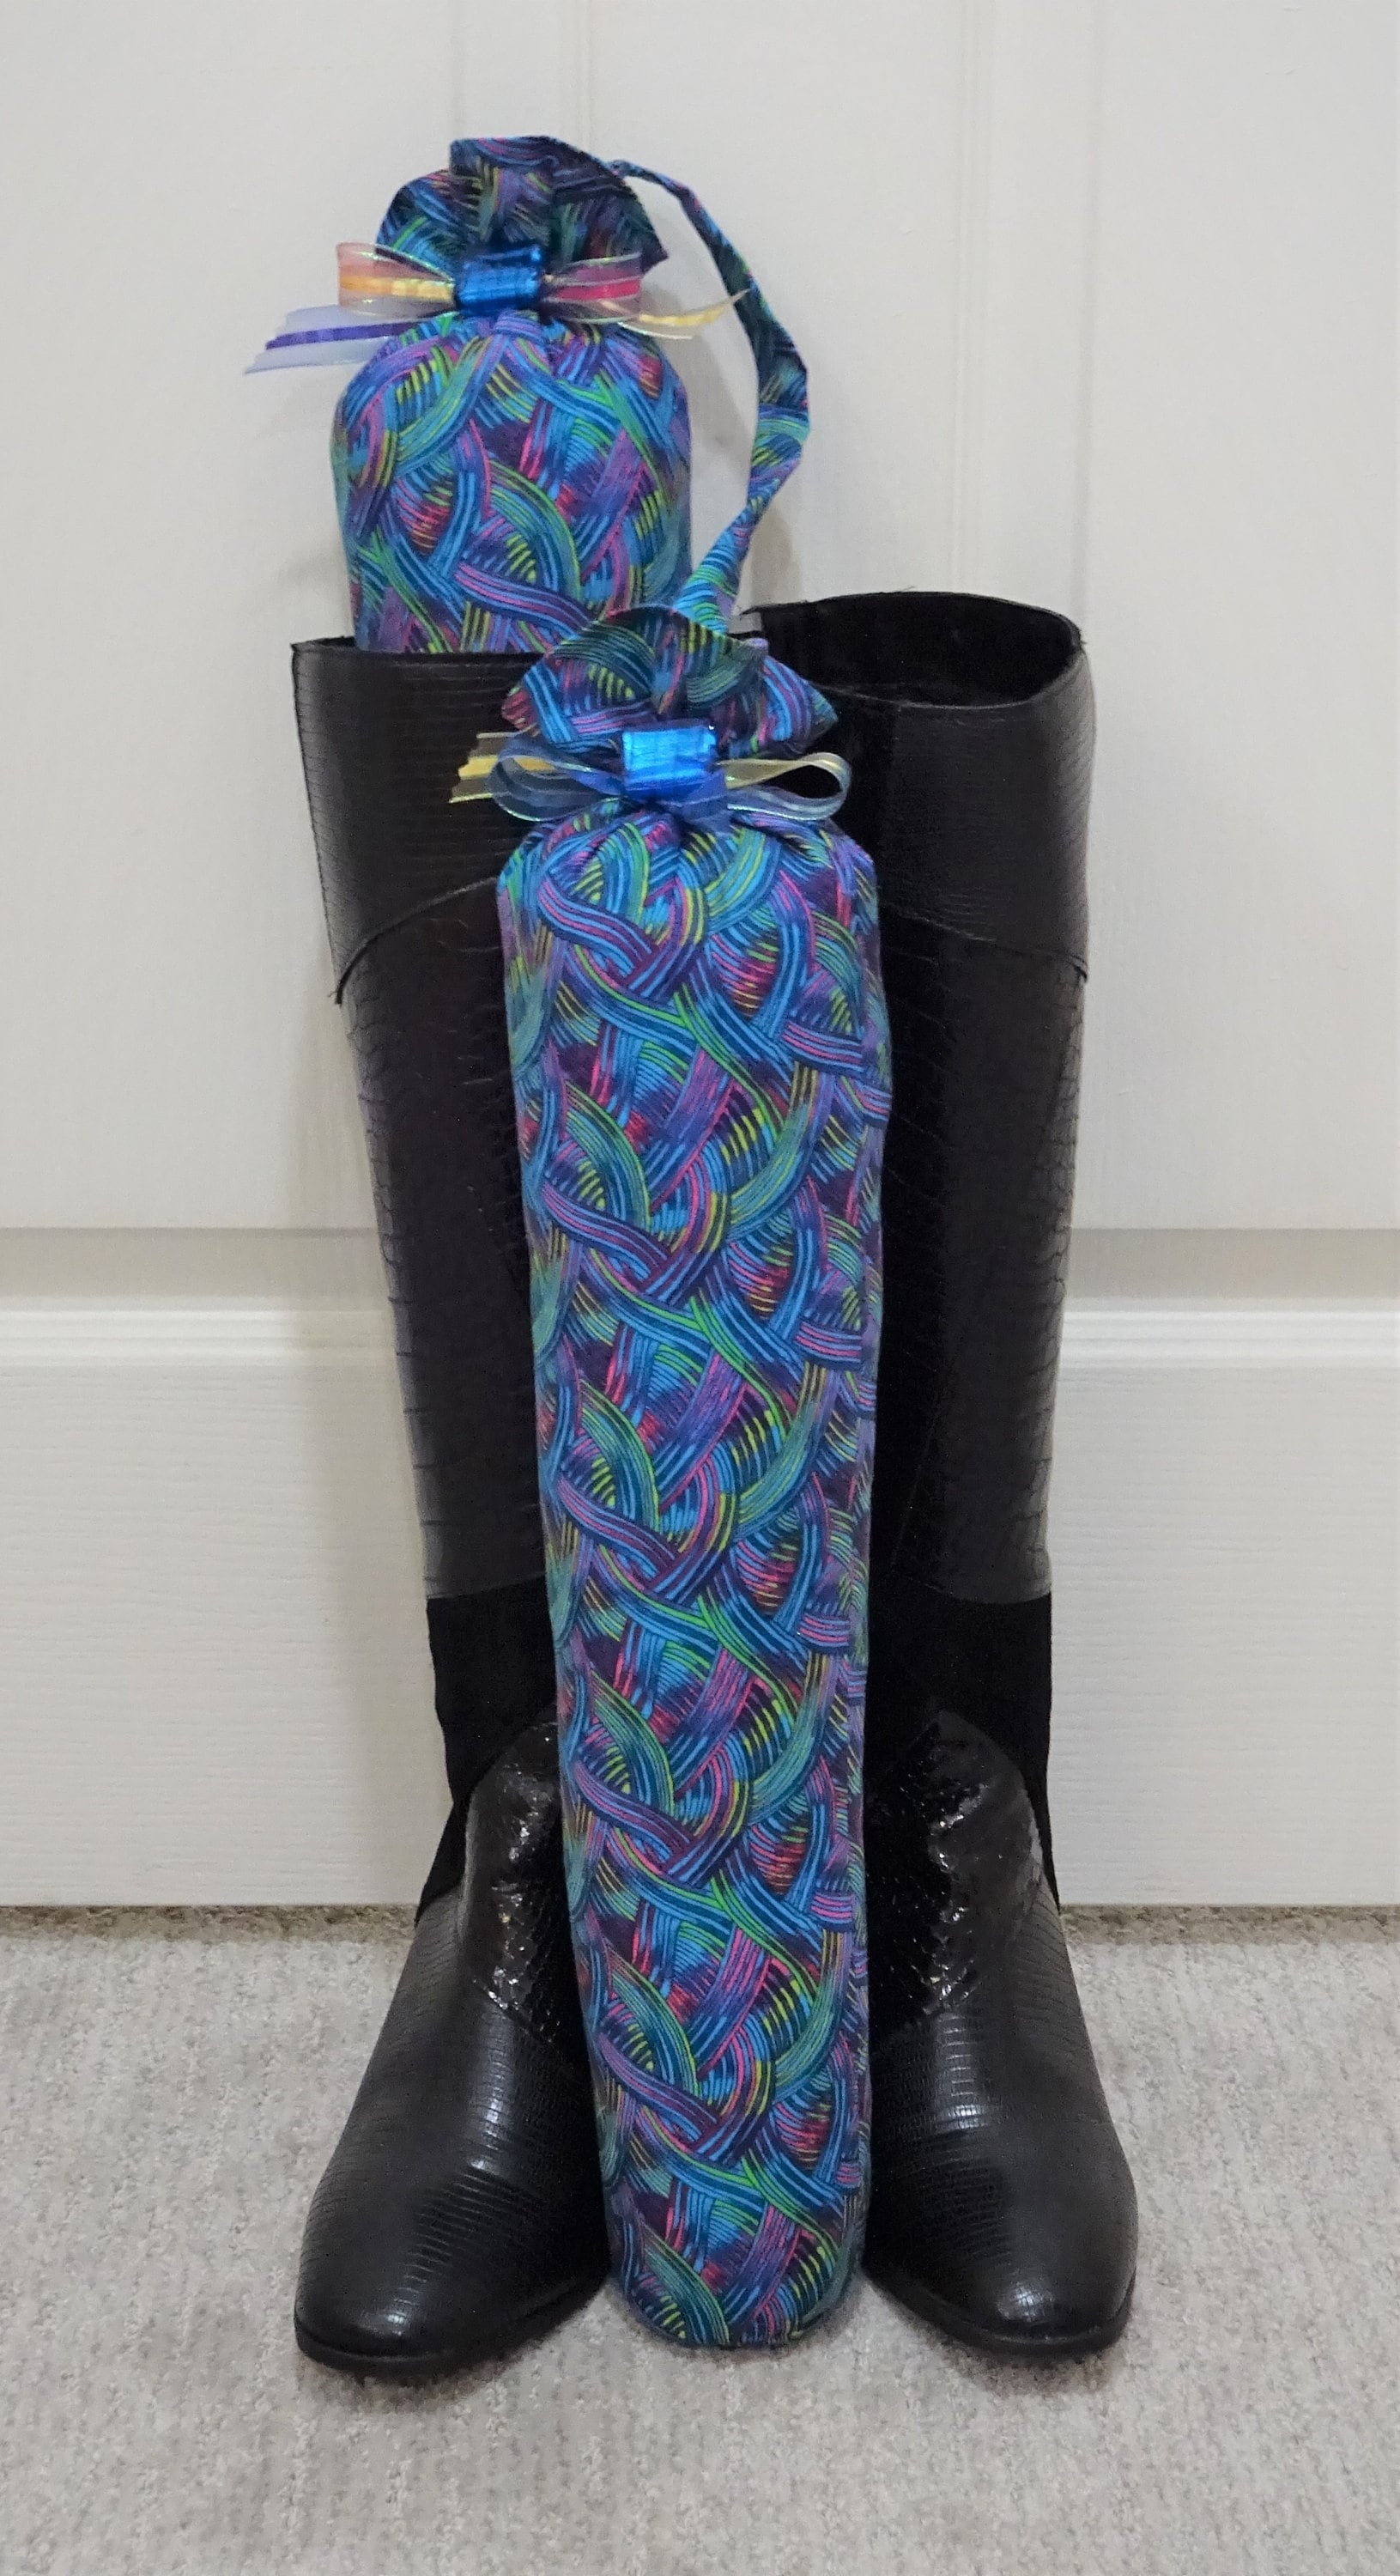 Boot Trees Boot Shapers Boot Stands Perfect for Closet Organization  Complementary Black Tie-on Wood Tags for Custom Personalization. 